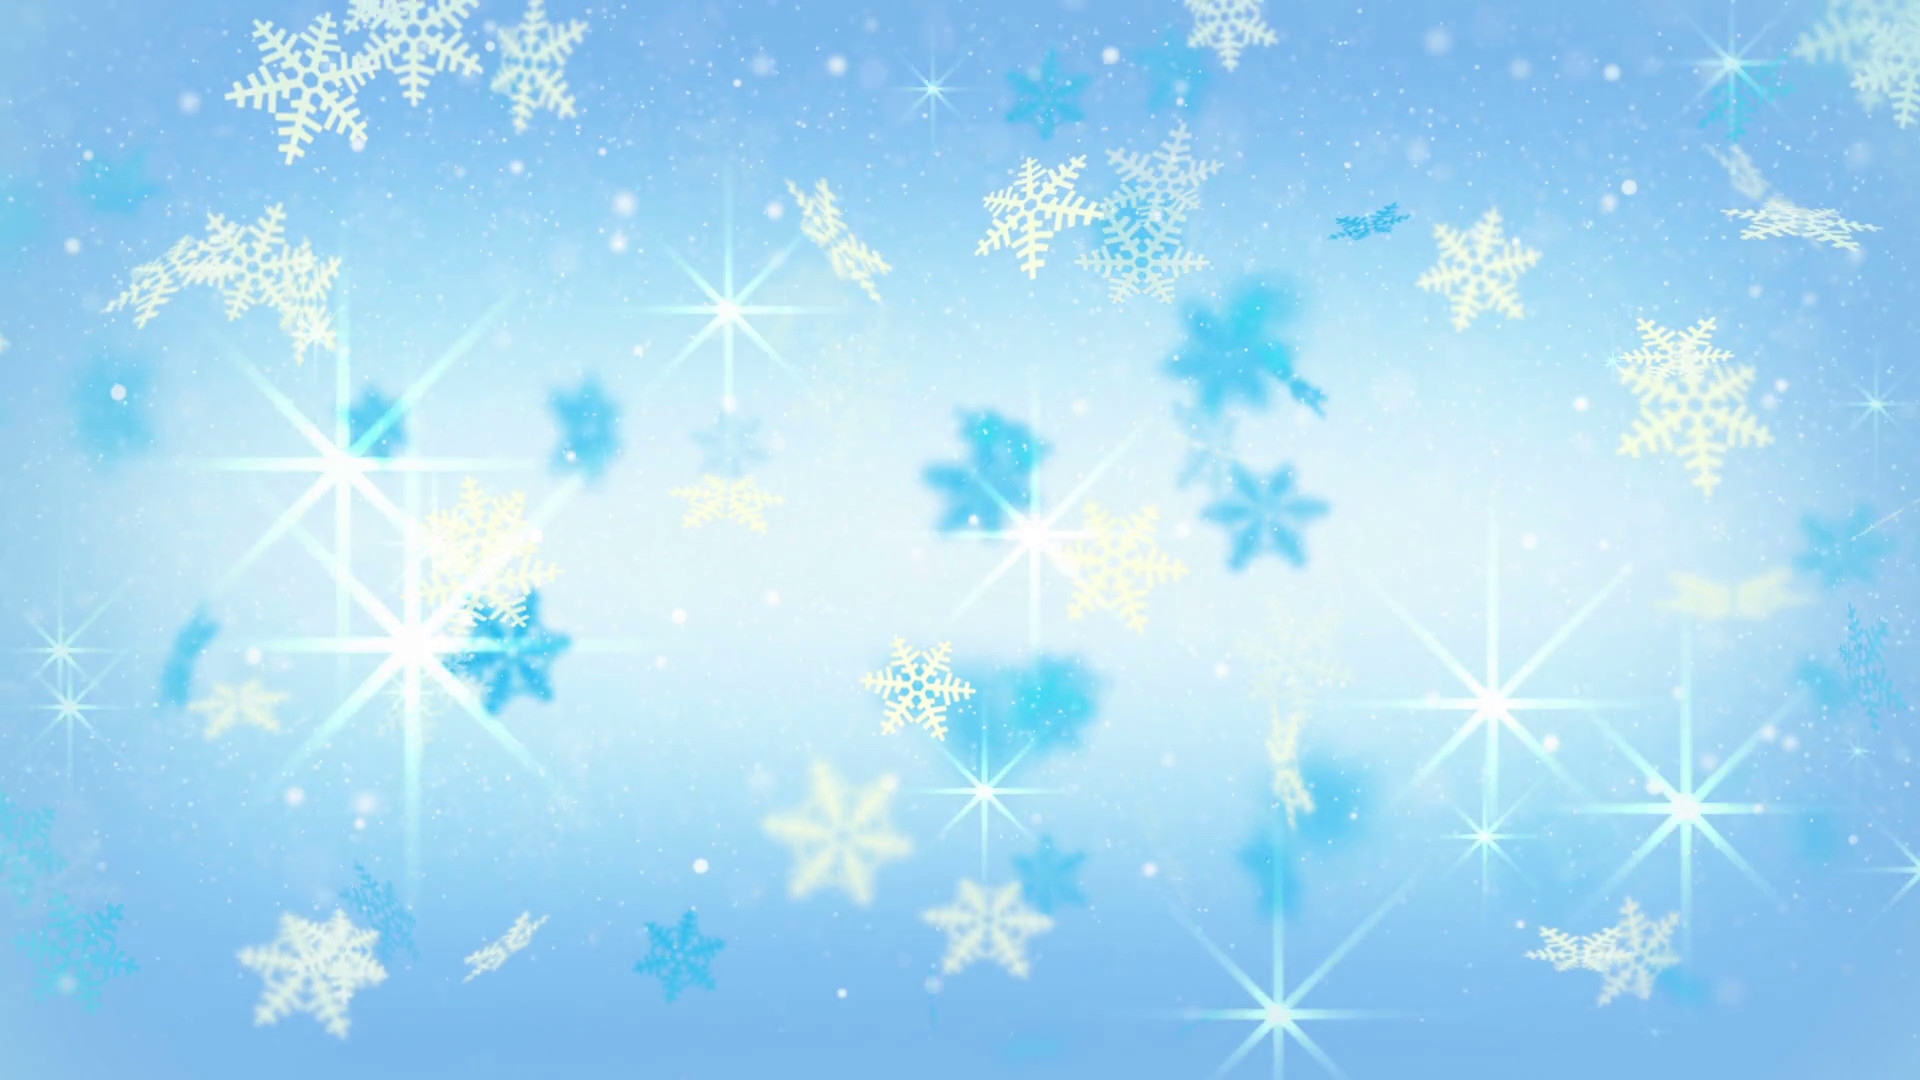 1920x1080 blue festive snowflakes and stars loopable background 4k (4096x2304) Motion  Background - VideoBlocks